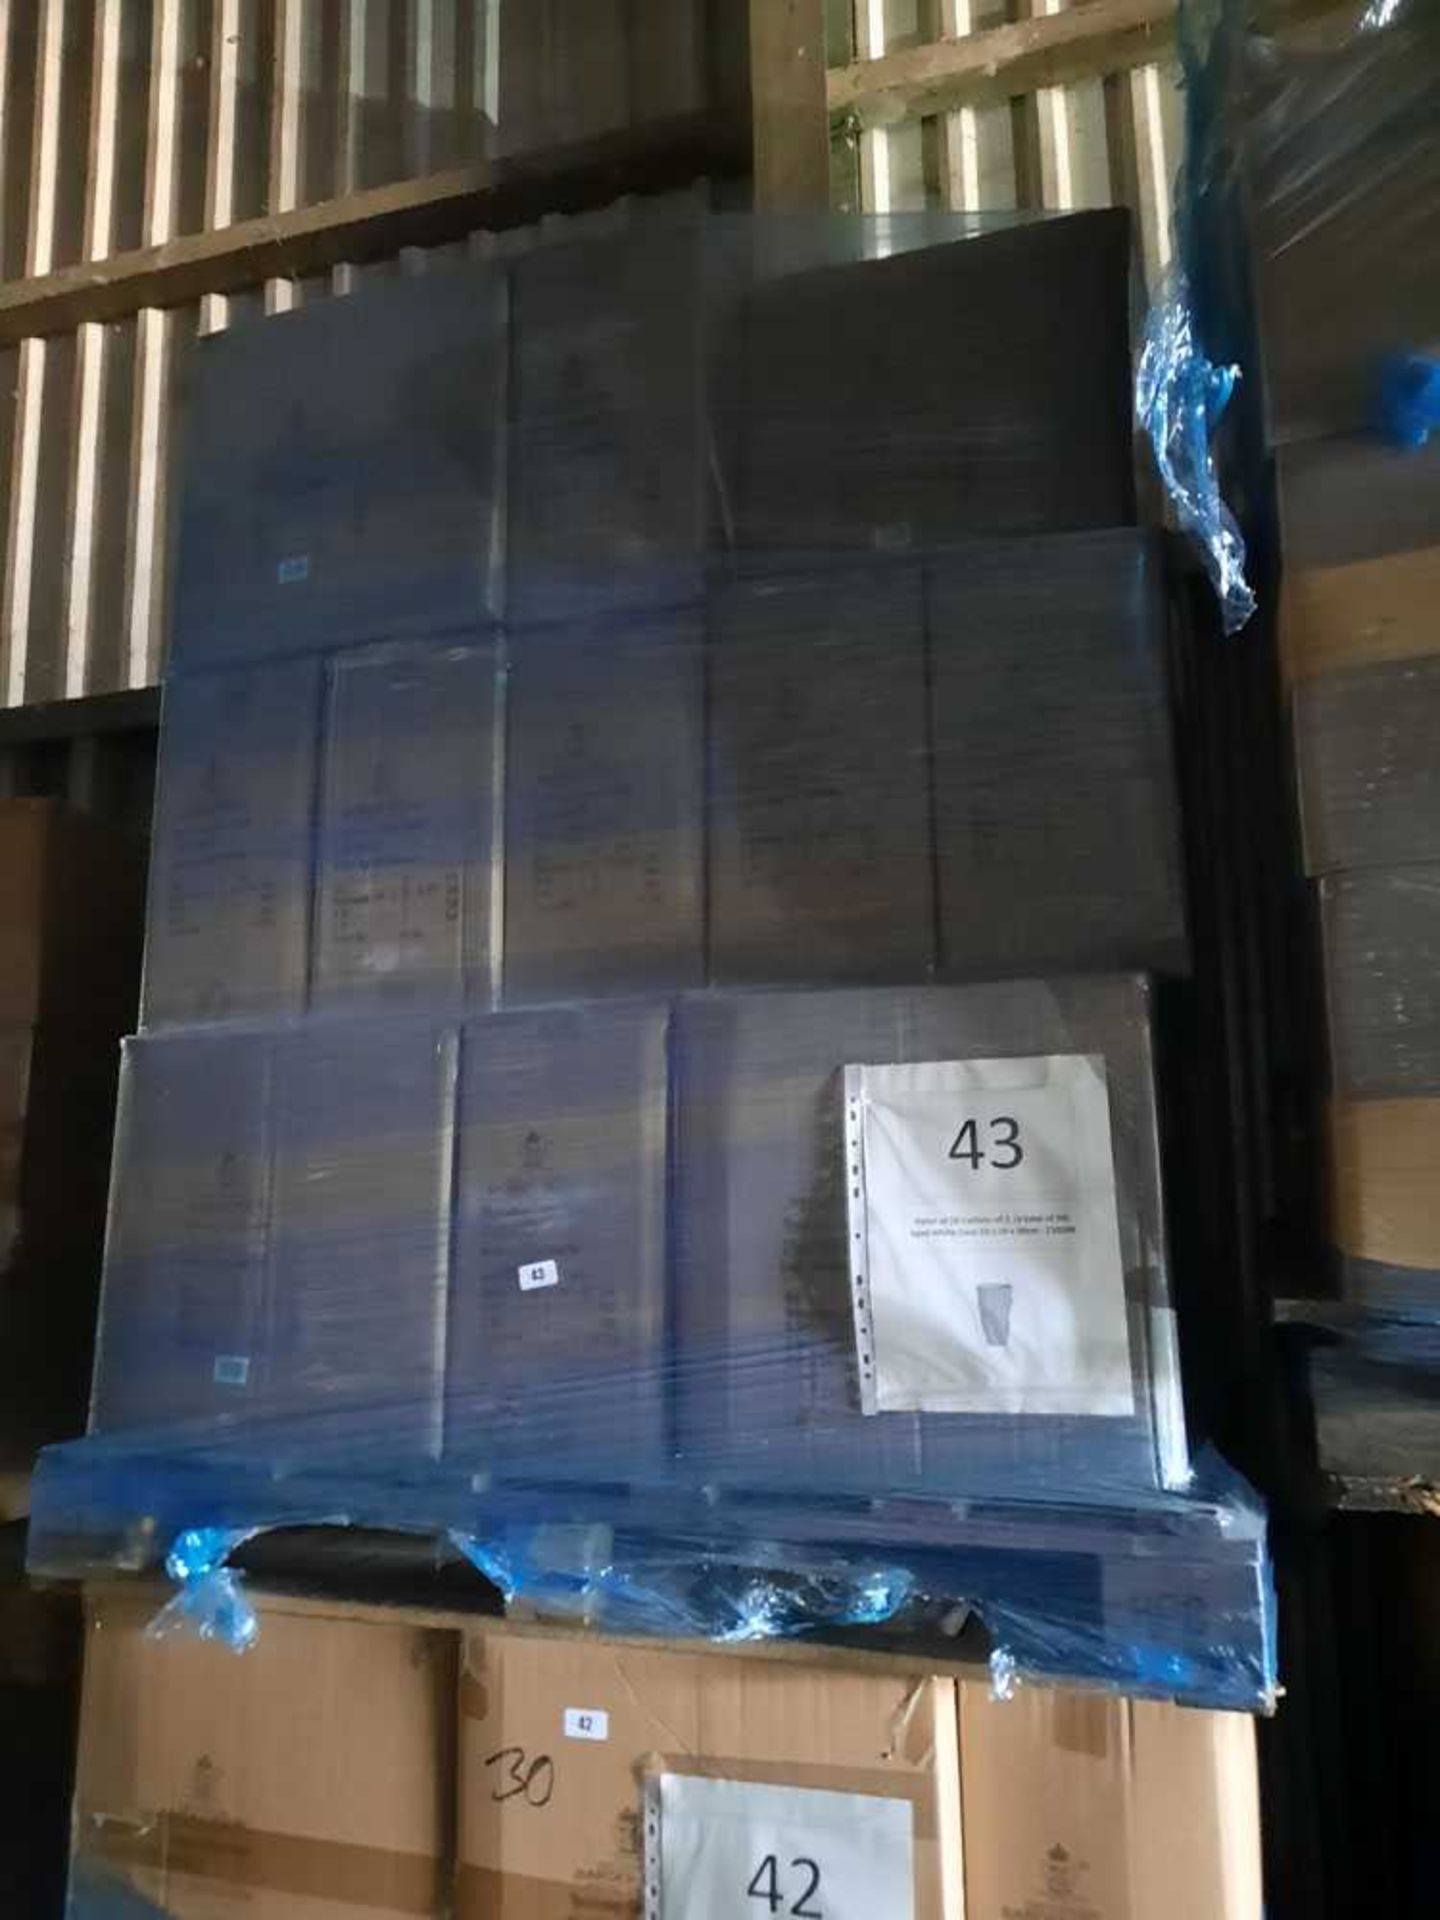 +VAT Pallet of 28 Cartons of 2, (a total of 56) Aged White Vase 19 x 19 x 39cm - 210249 - Image 2 of 3